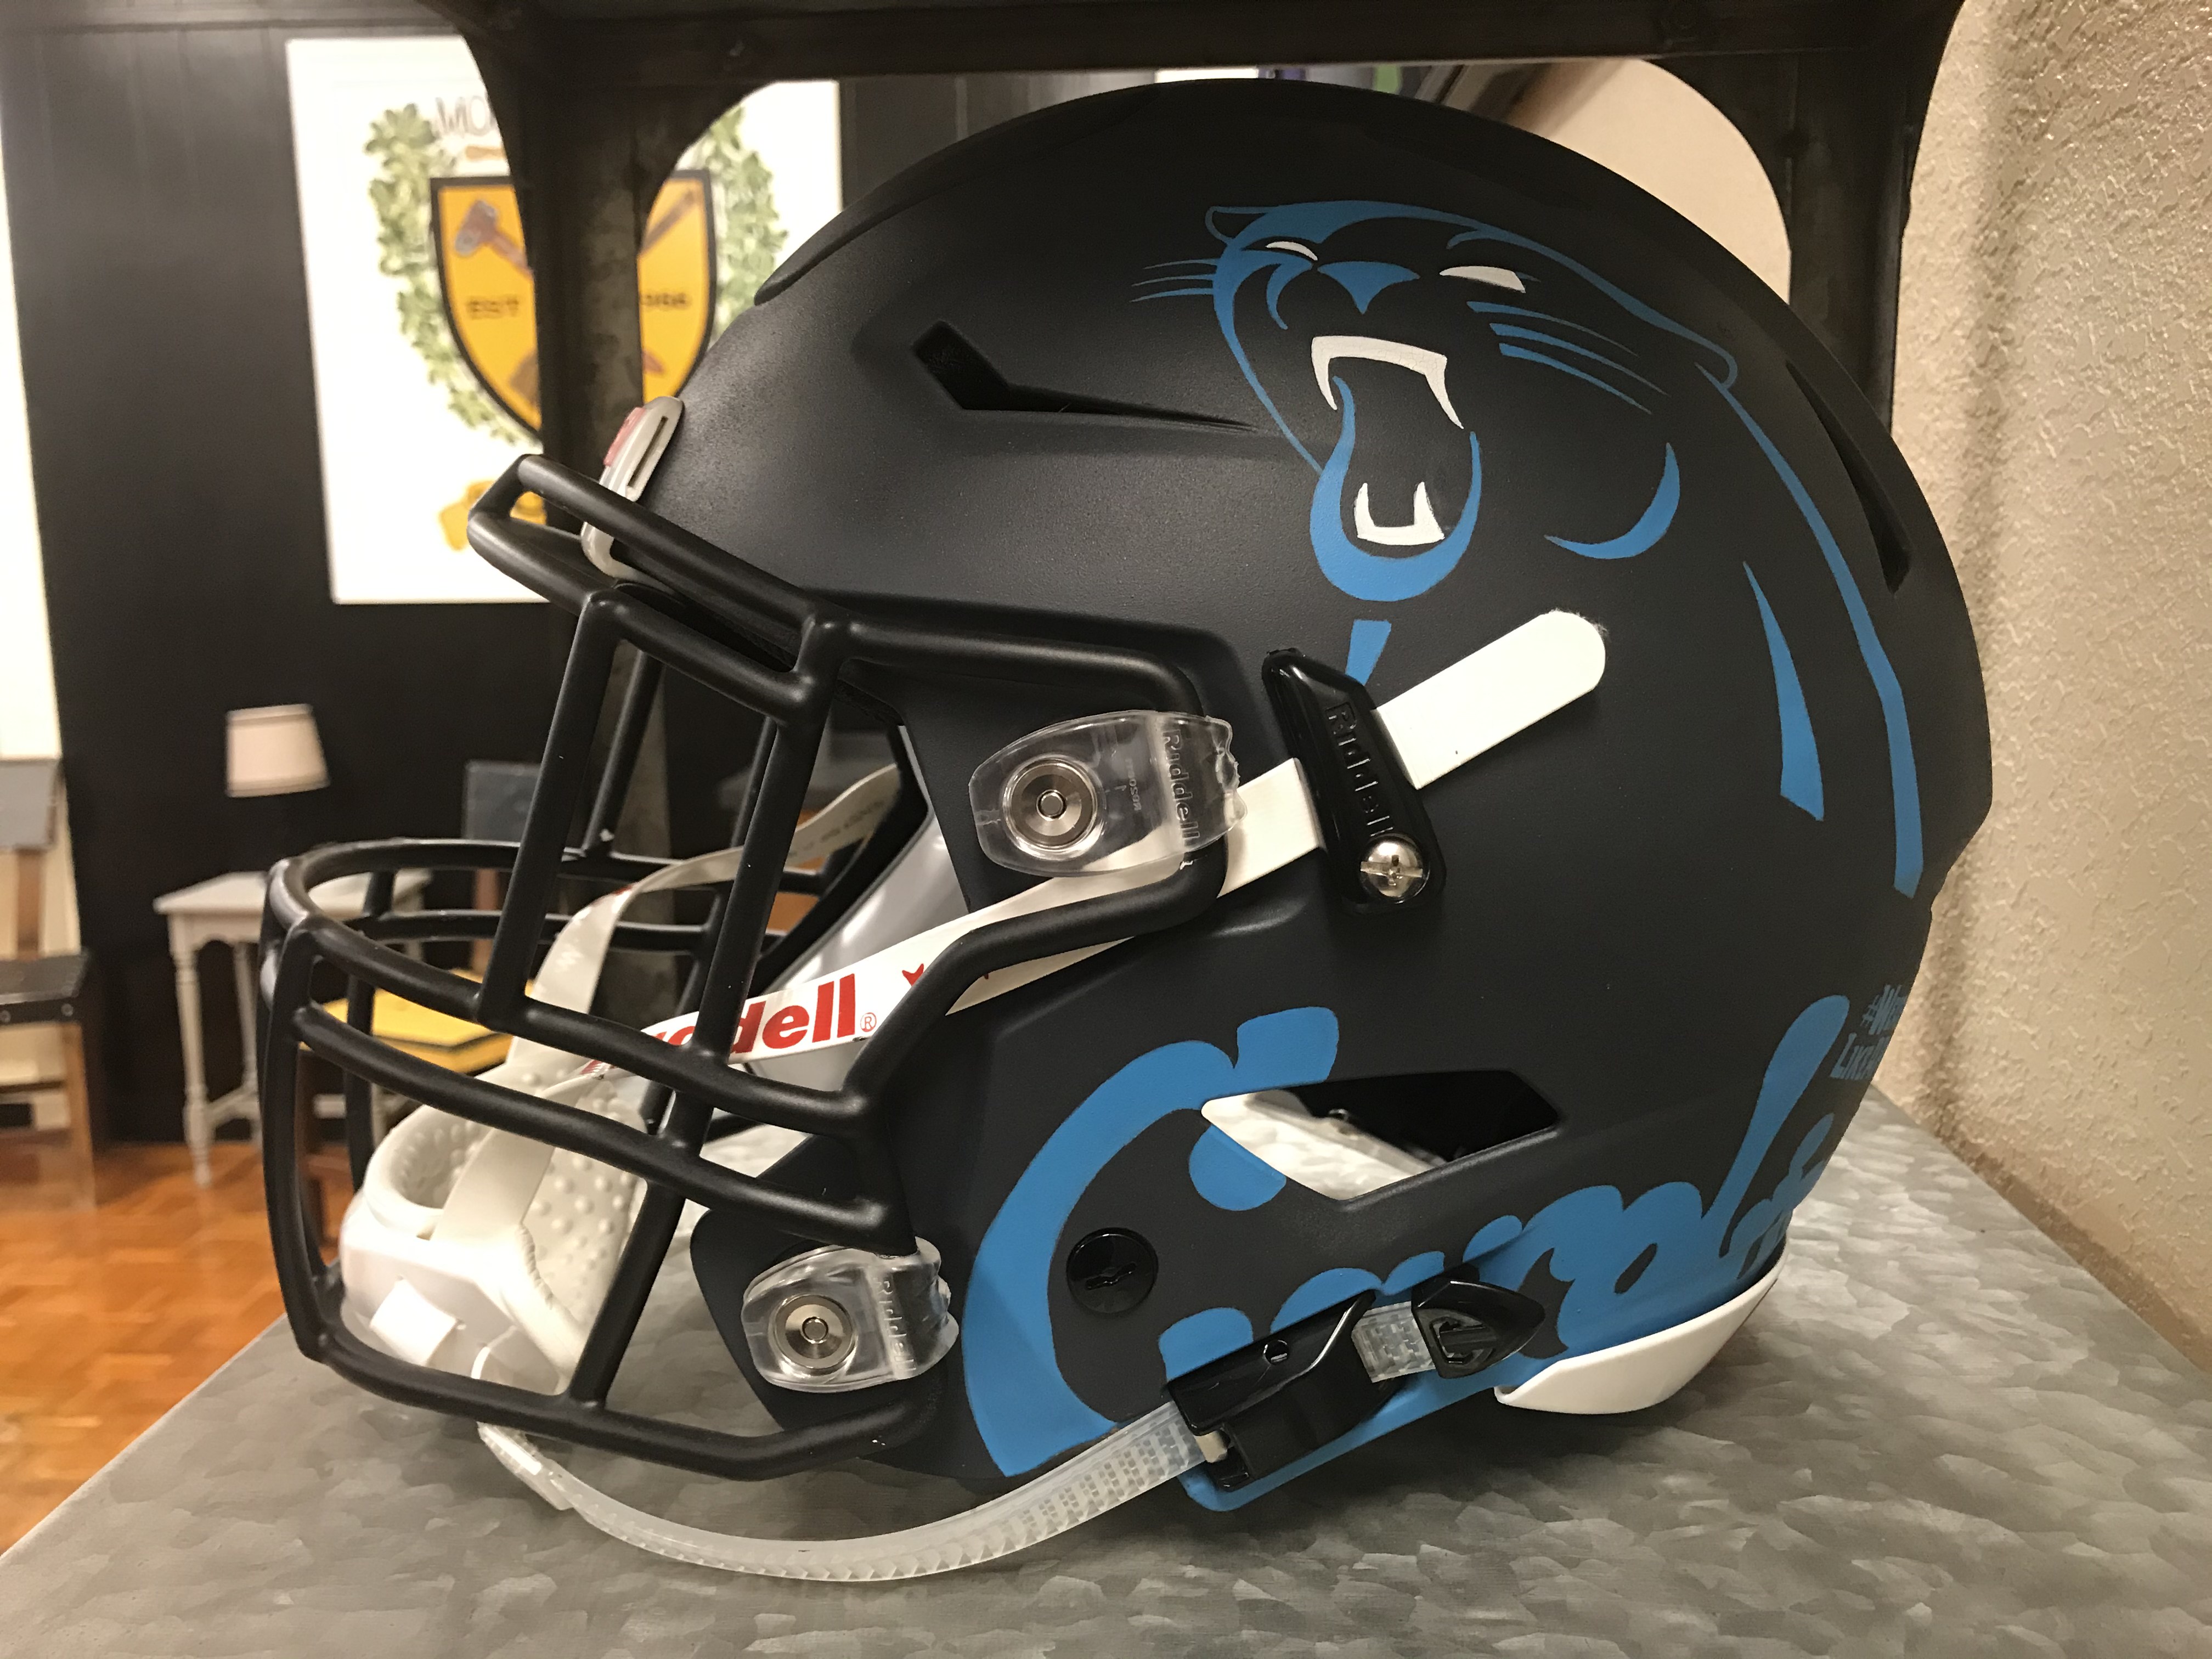 New Helmets from the Carolina Panthers | Tuscola High School